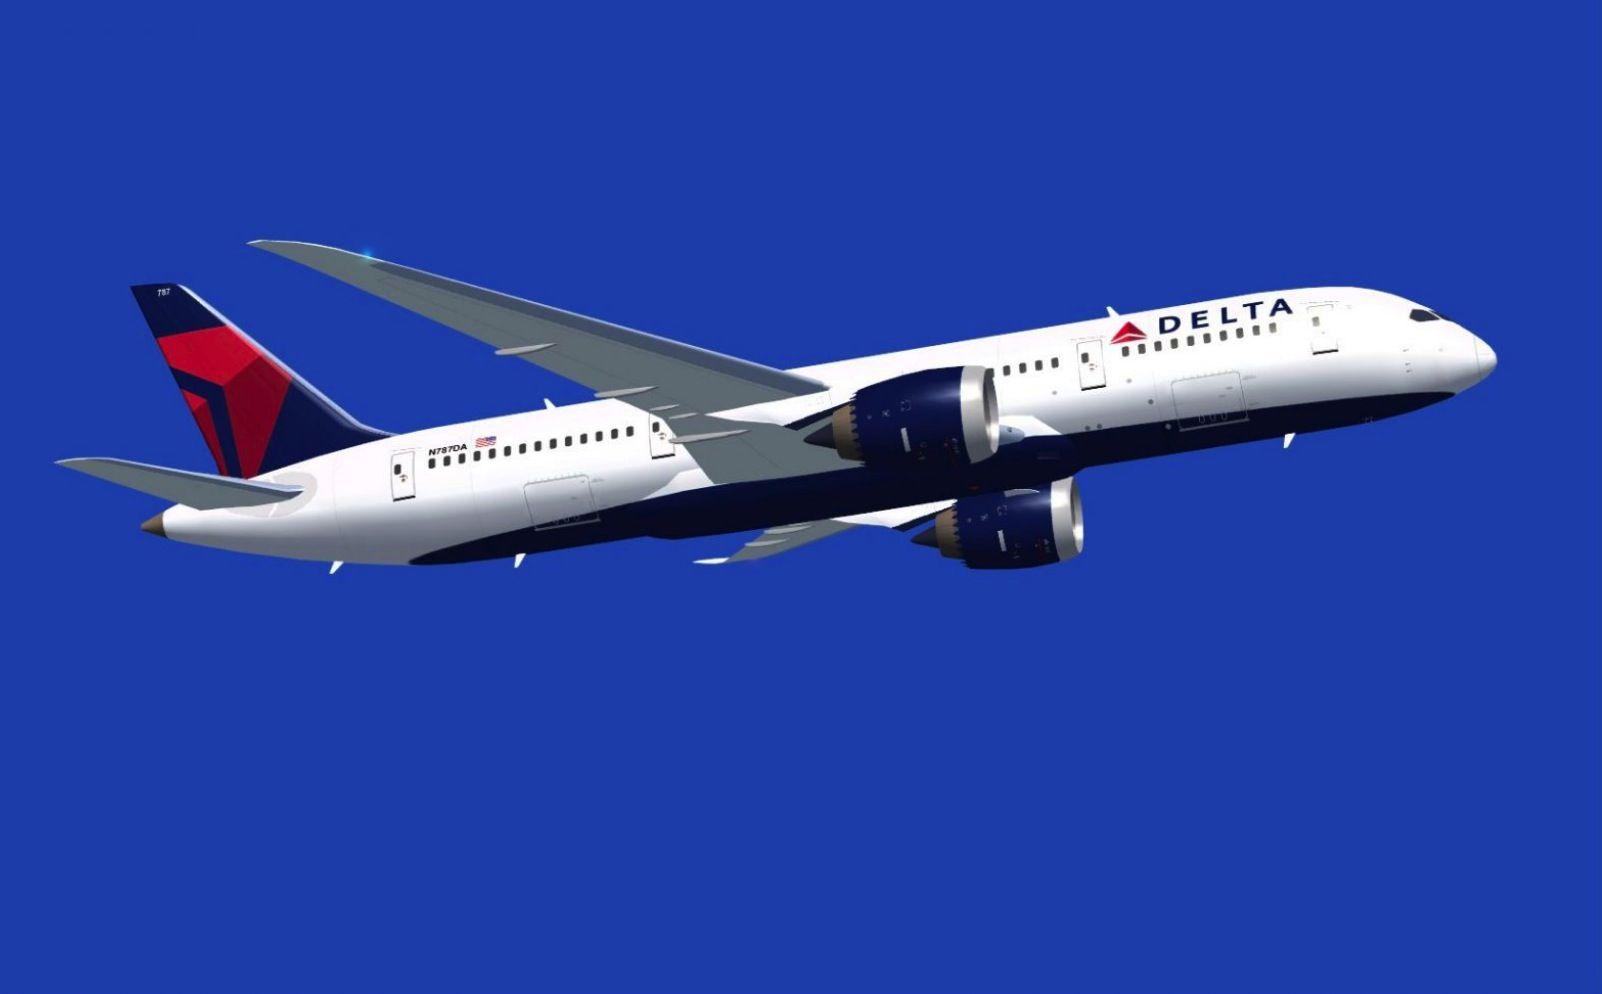 Delta Air Lines suffers global outage take to Twitter to